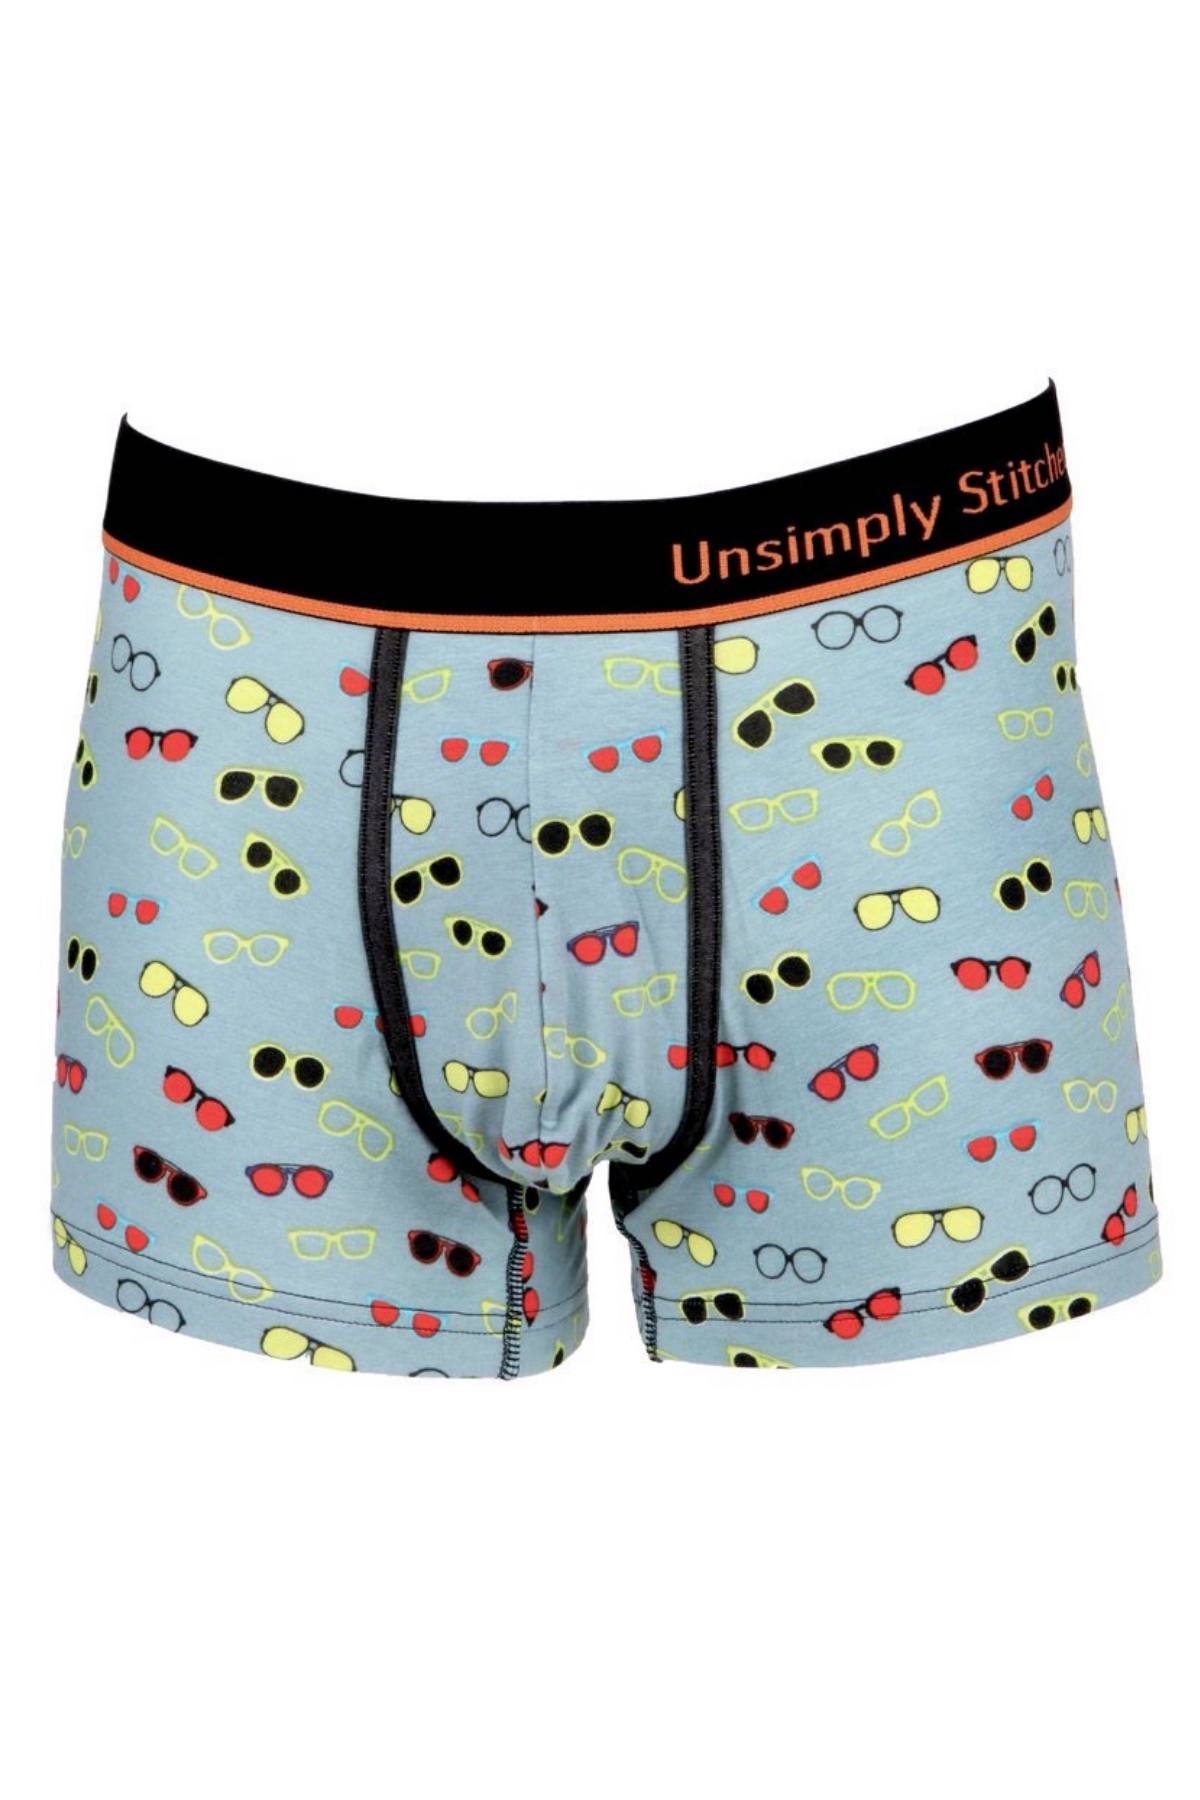 Unsimply Stitched Grey Shades Trunk